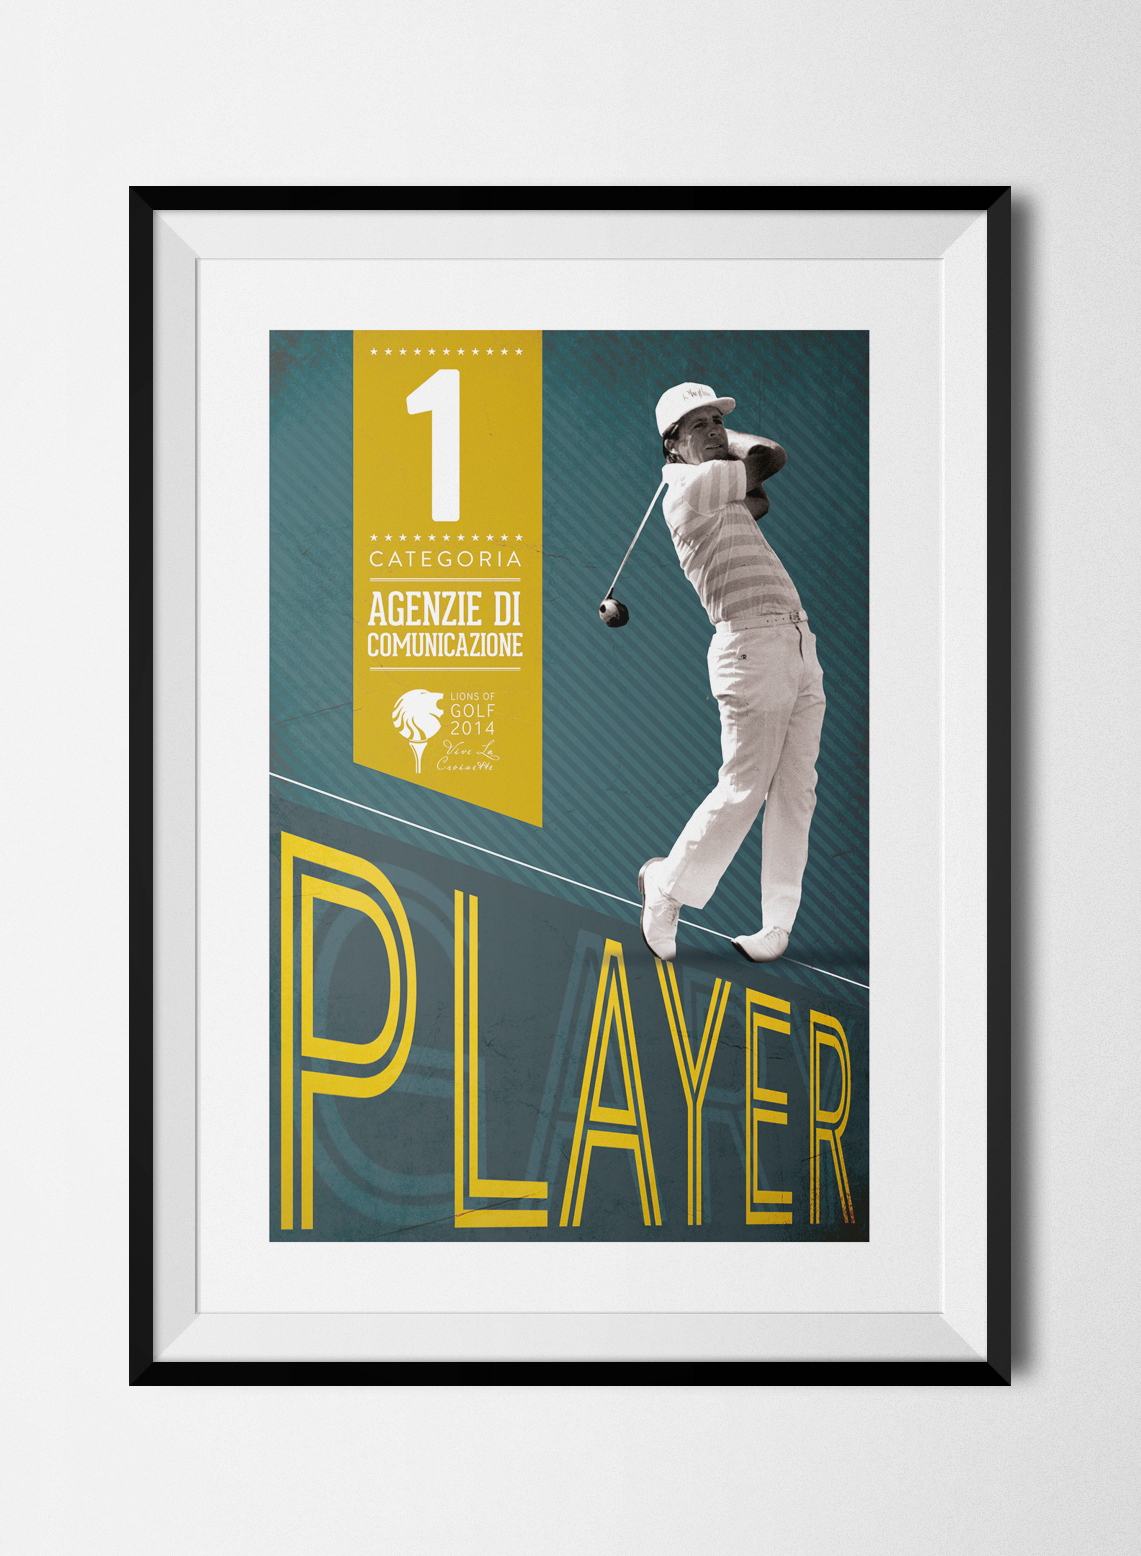 Lions golf TBWA poster Awards sport tiger woods frame Pasquinelli pedrazzini Cannes canneslions integer